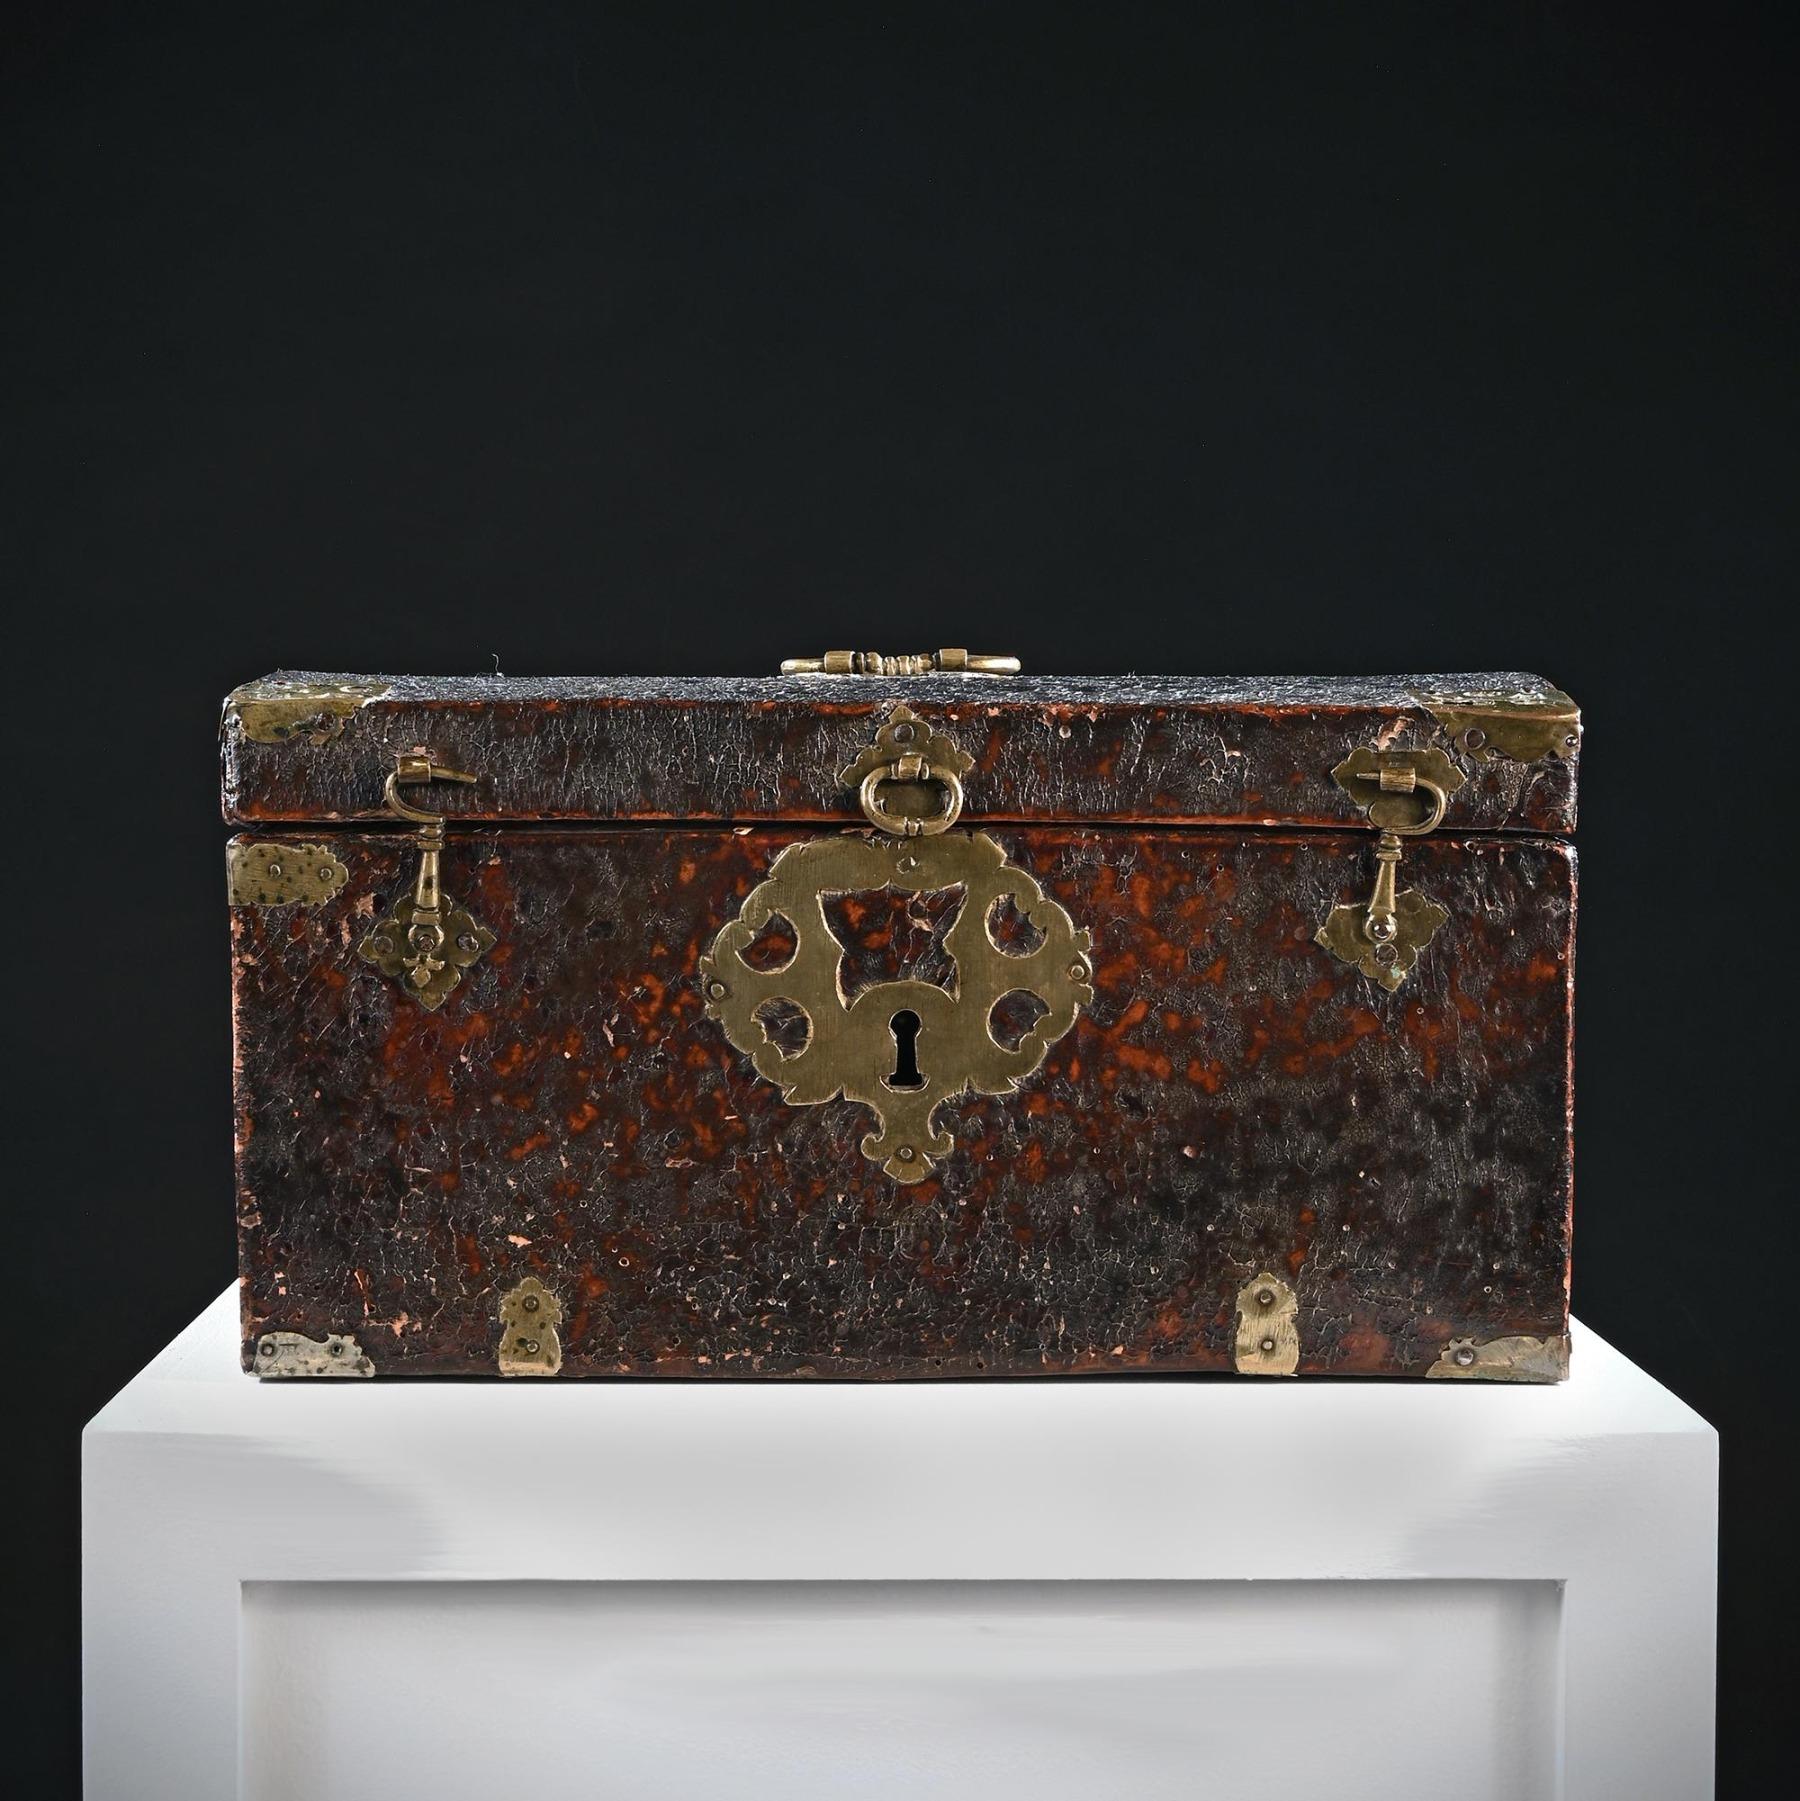 A very fine and interesting late 17th century English work box or travelling case

English Circa 1680

Of conventional form with slightly domed lid, this piece has acquired a magnificent patina and colour-the leather showing all the wear one would